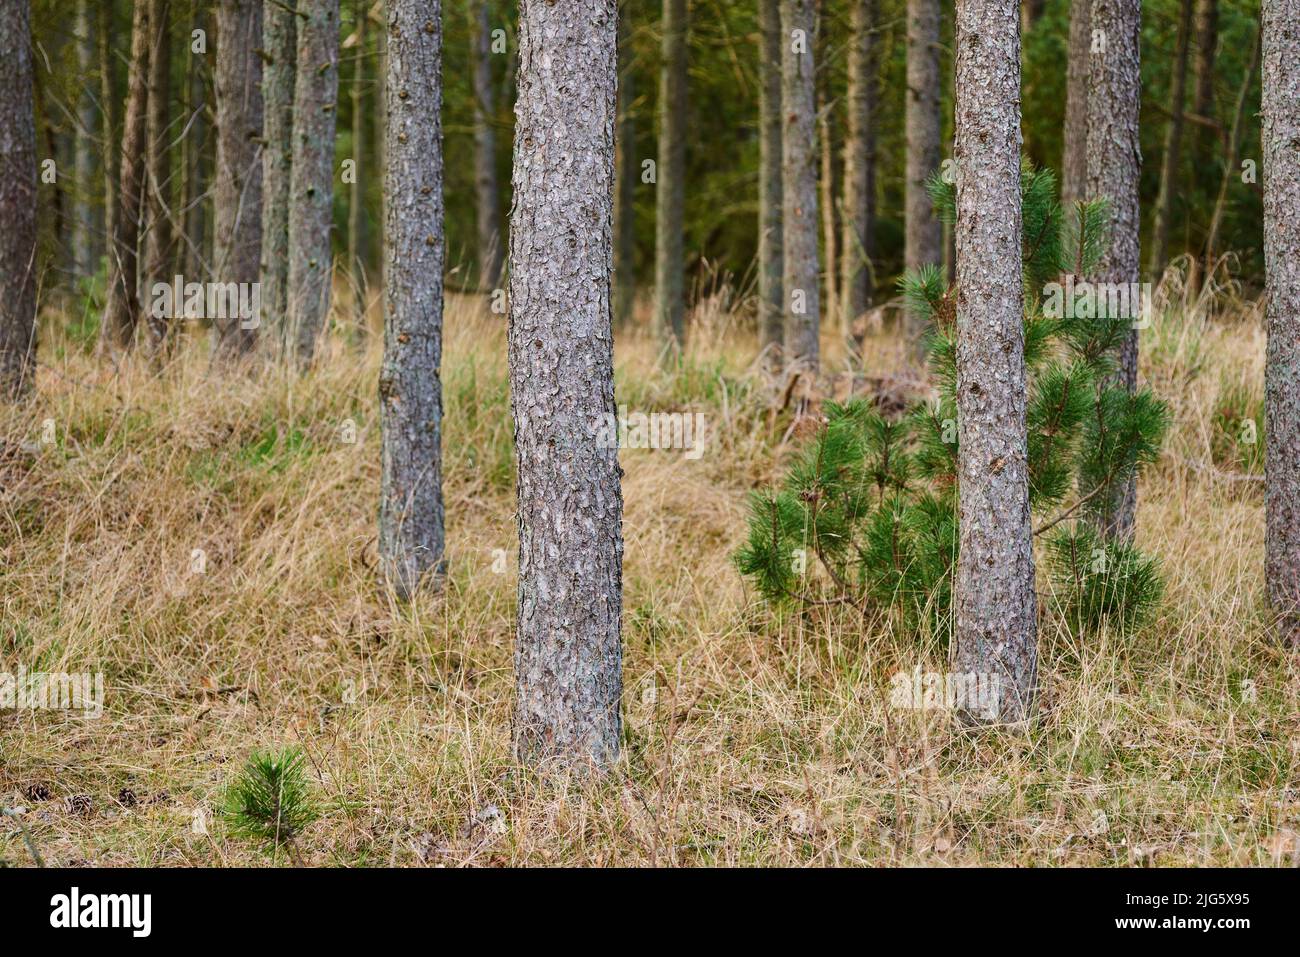 A pine tree forest with dry grass and green plants. Landscape of many pine tree trunks in nature during autumn season. Uncultivated and wild shrubs Stock Photo